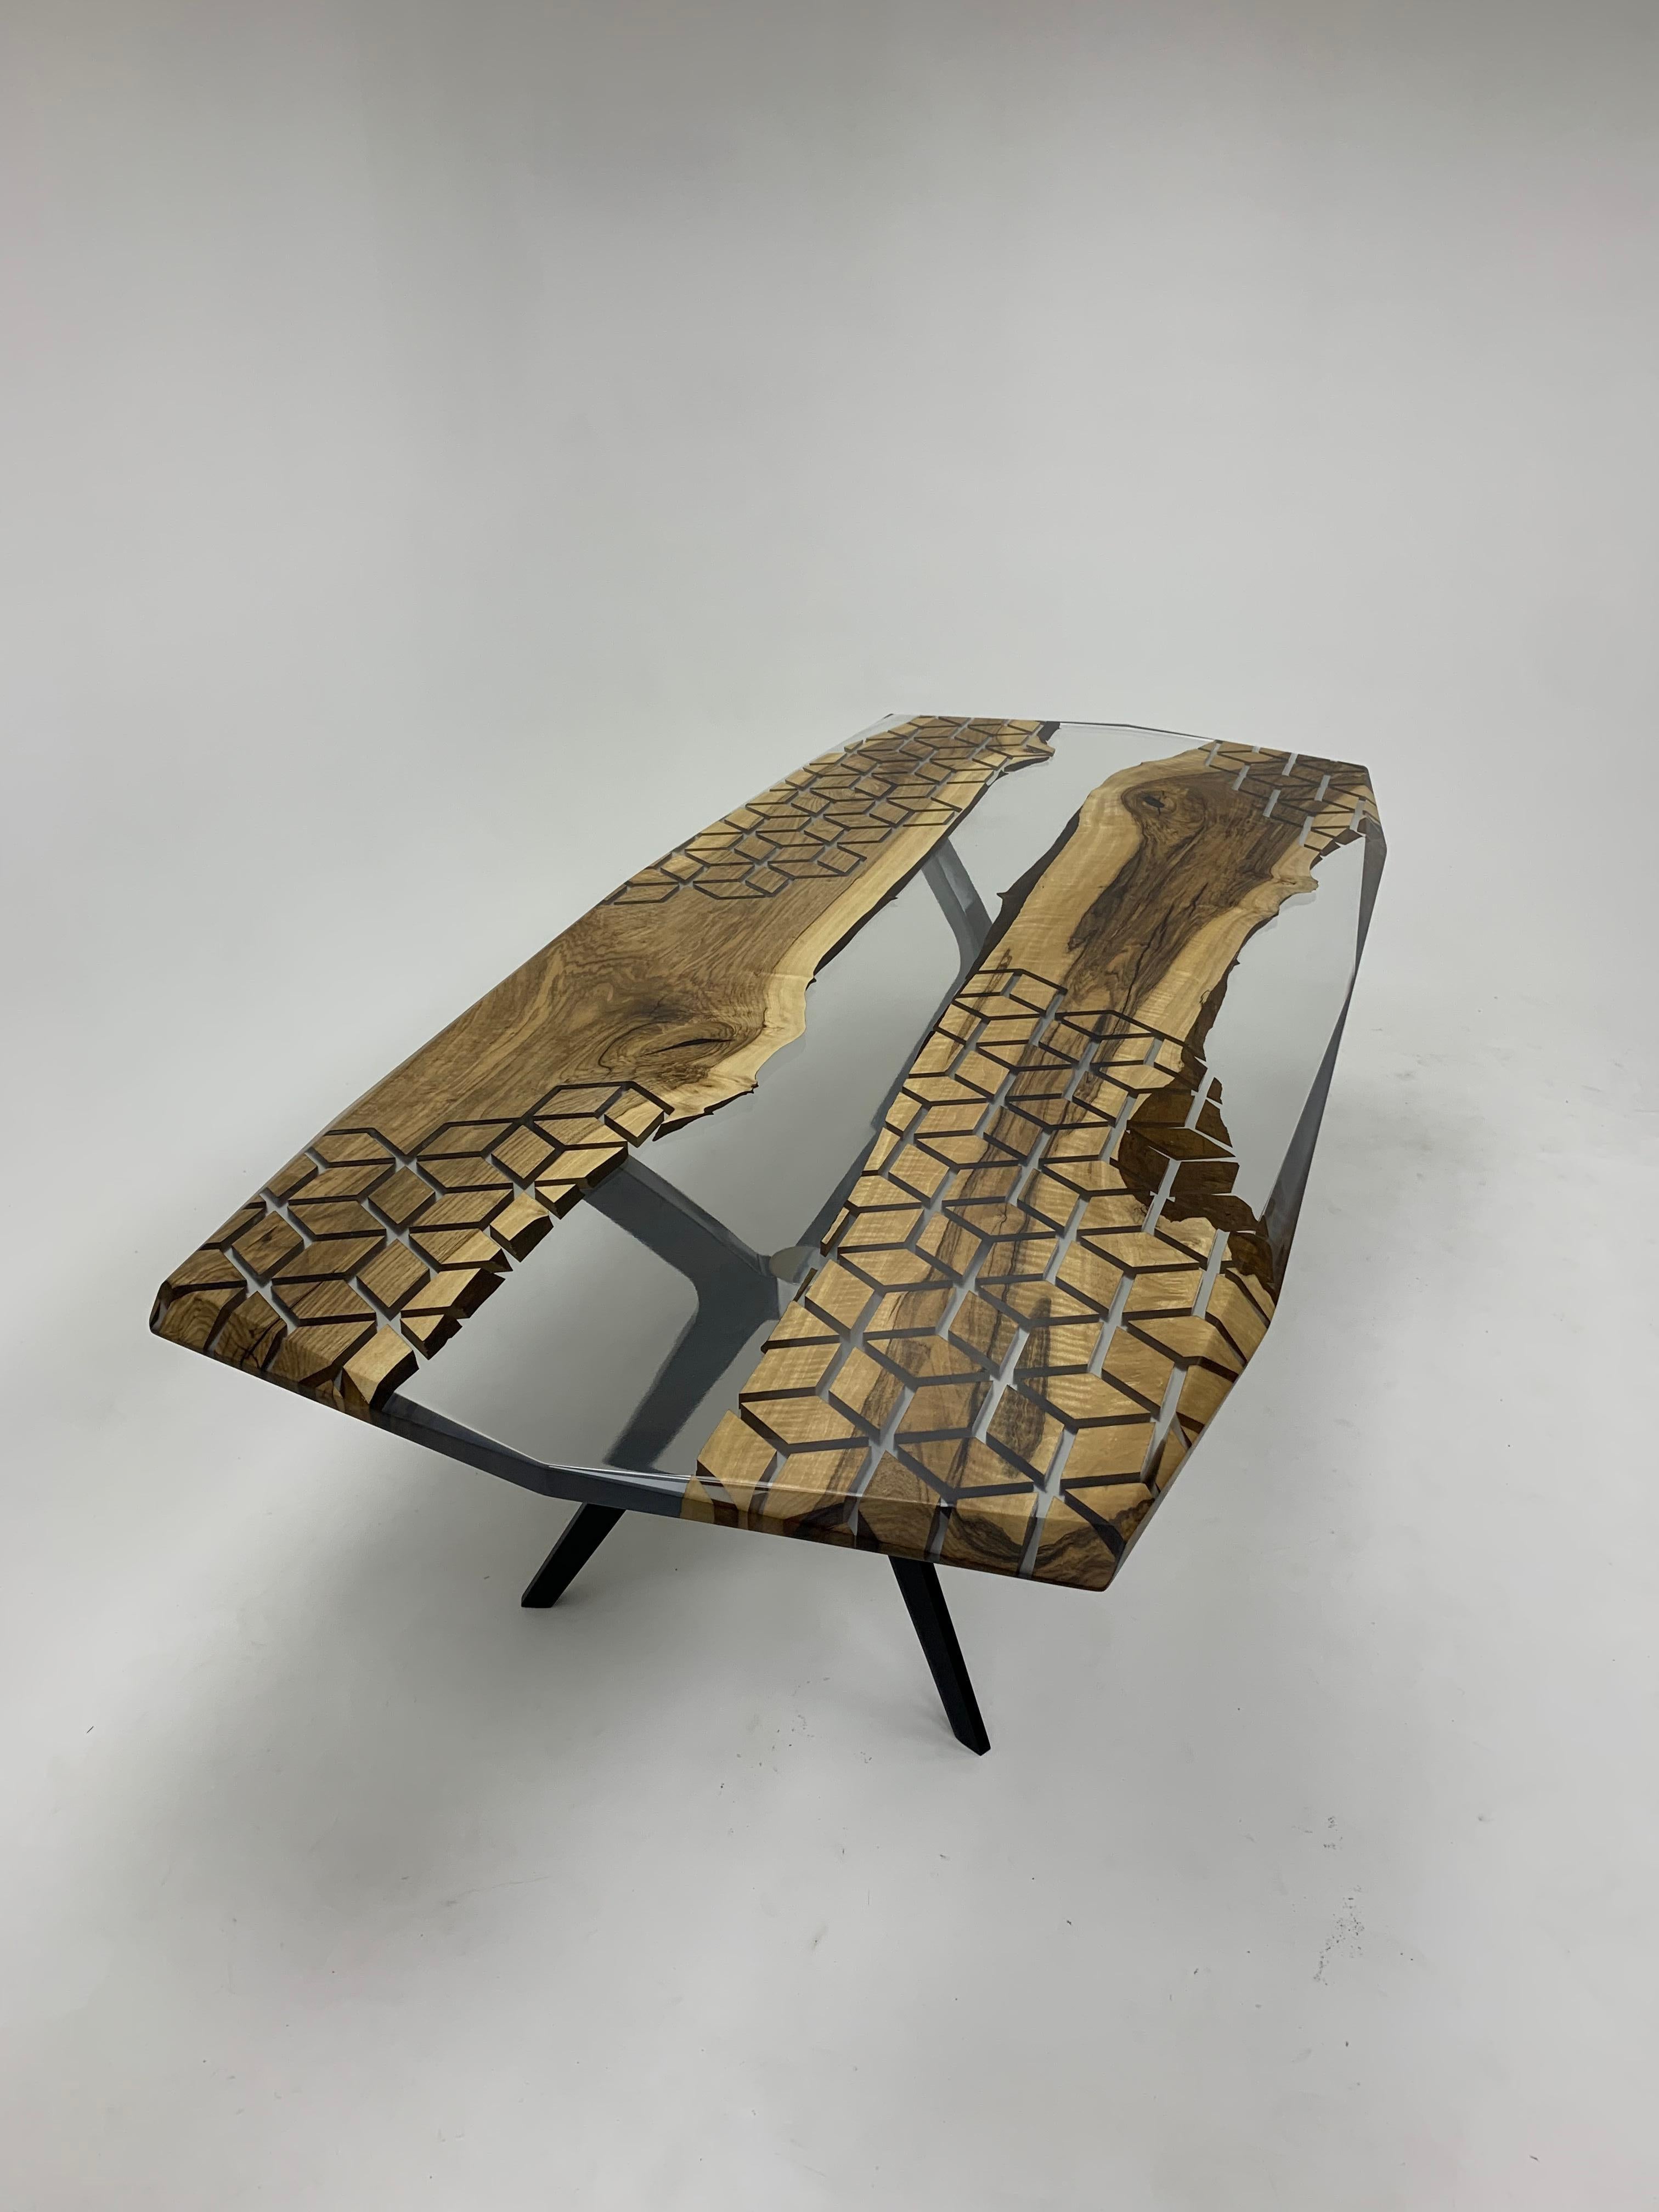 Turkish Diamond Epoxy Resin Live River Live Edge Dining Table For Sale